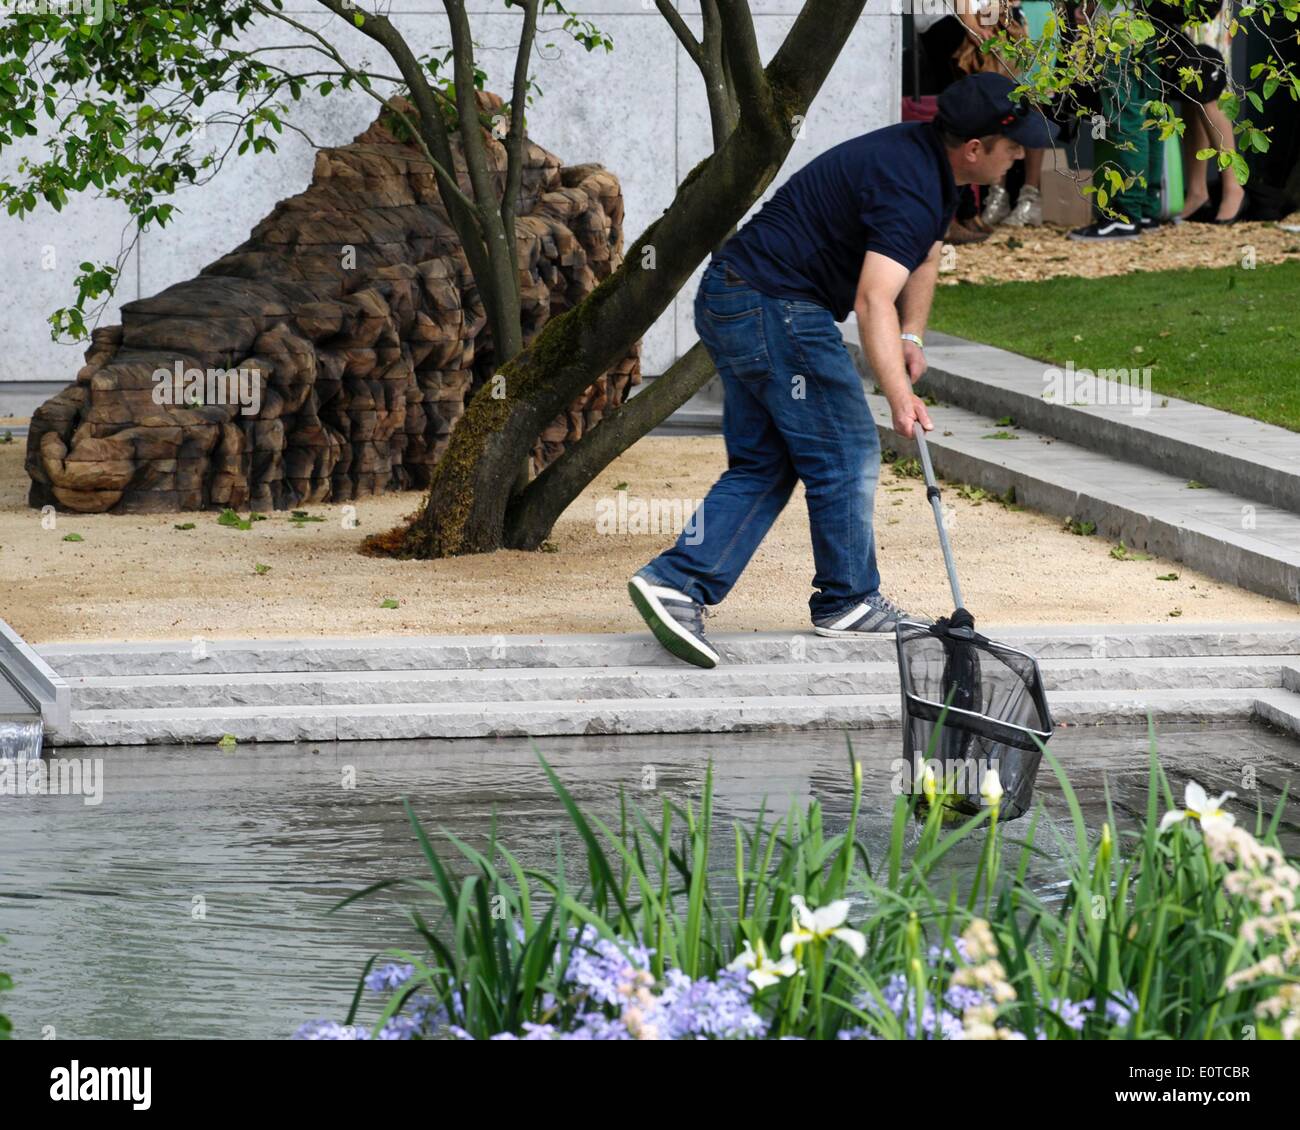 London, UK. 19th May, 2014. 2014 RHS Chelsea Flower Show. The pools are kept clear of Falling leaves in The Best in Show, Gold Medal winning Laurent-Perrier Garden.,designed by Luciano Giubbilei. Picture by Julie Edwards/Alamy Live News Stock Photo